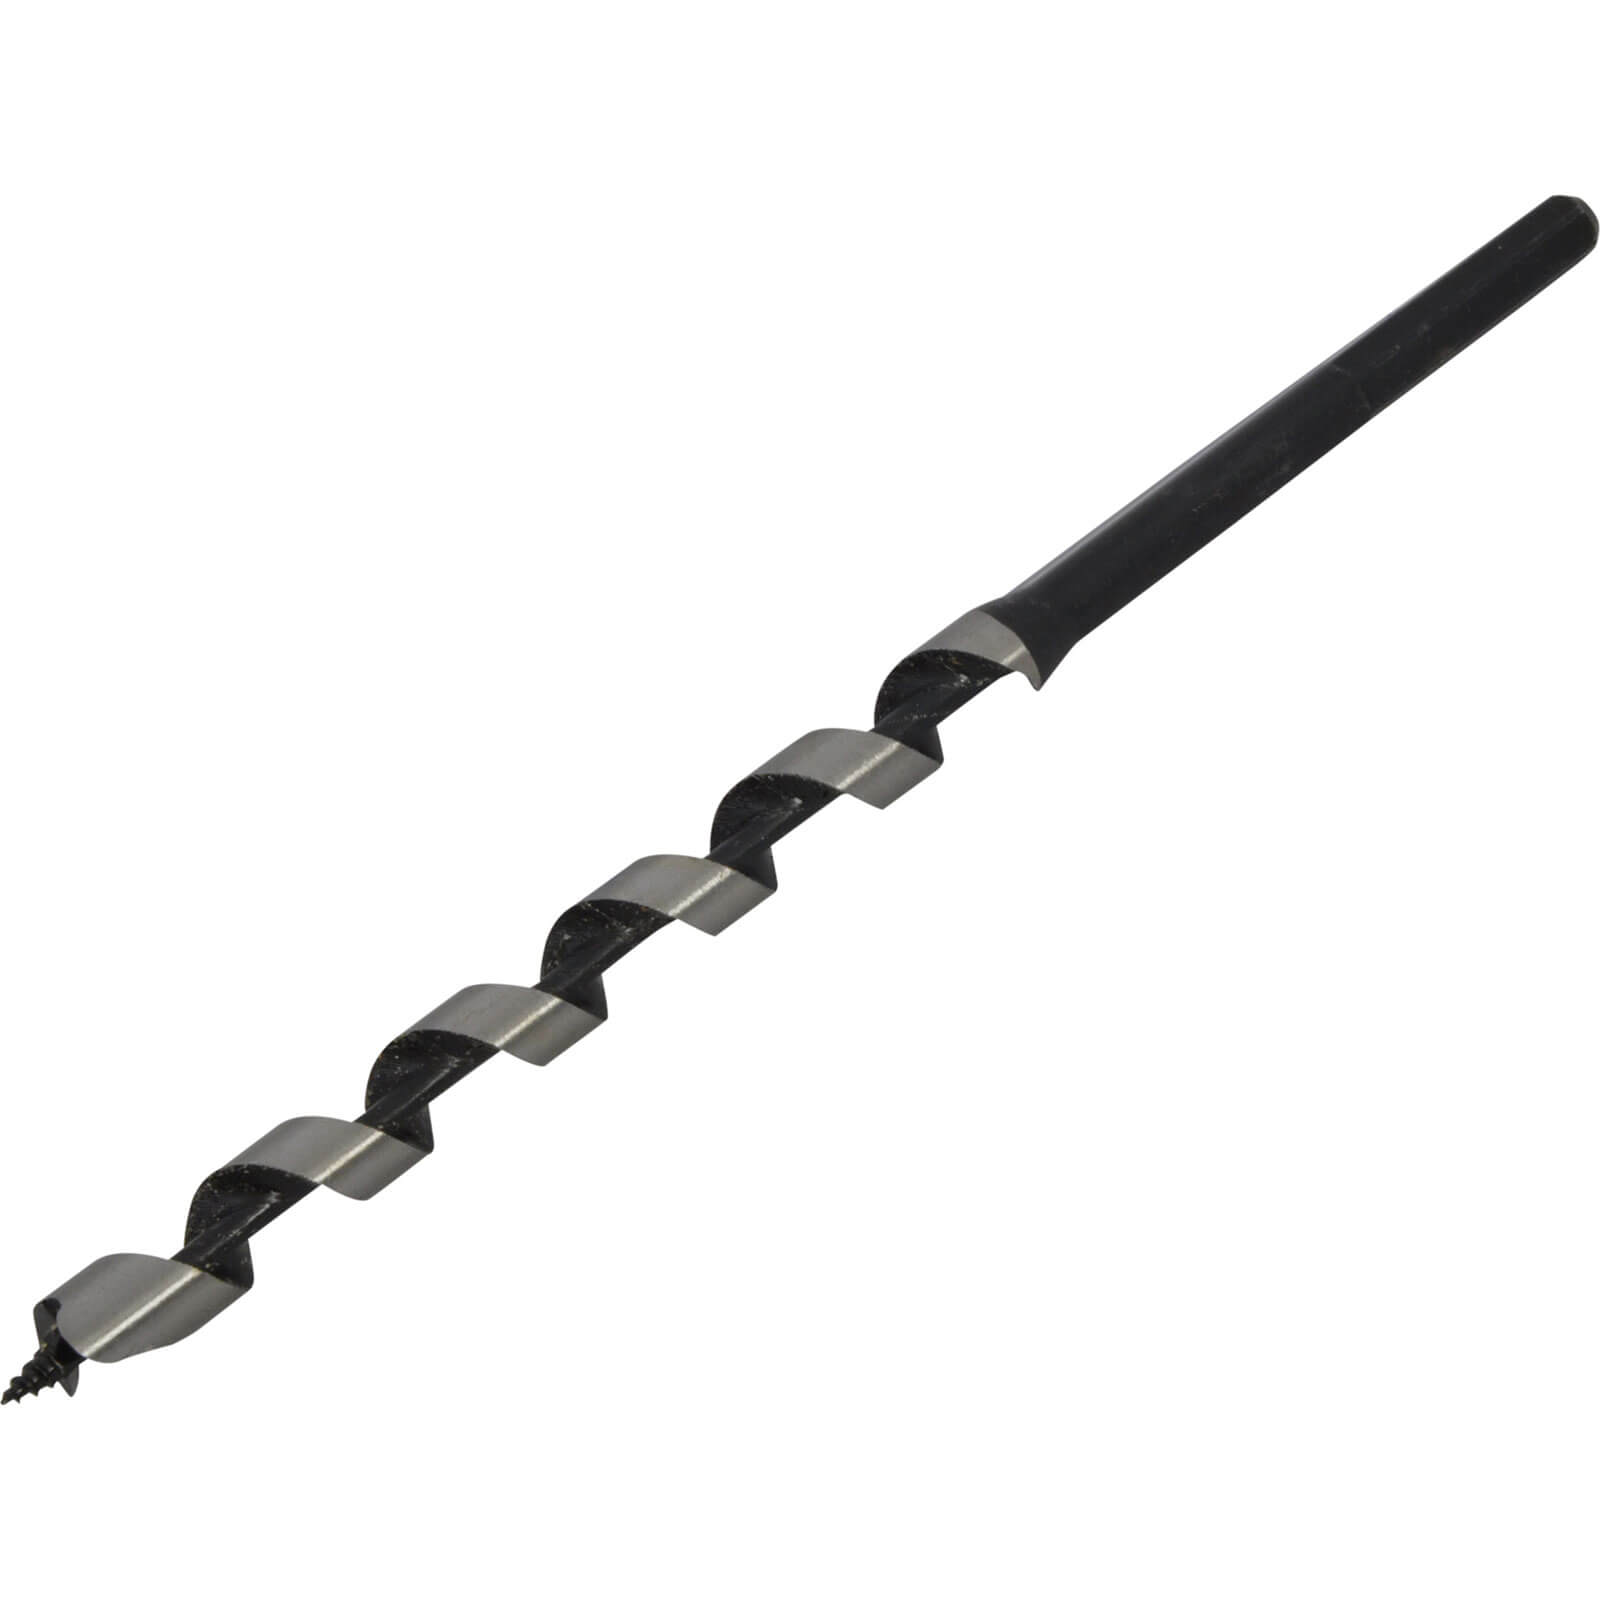 Image of Bahco Combination Auger Drill Bit 7mm 170mm